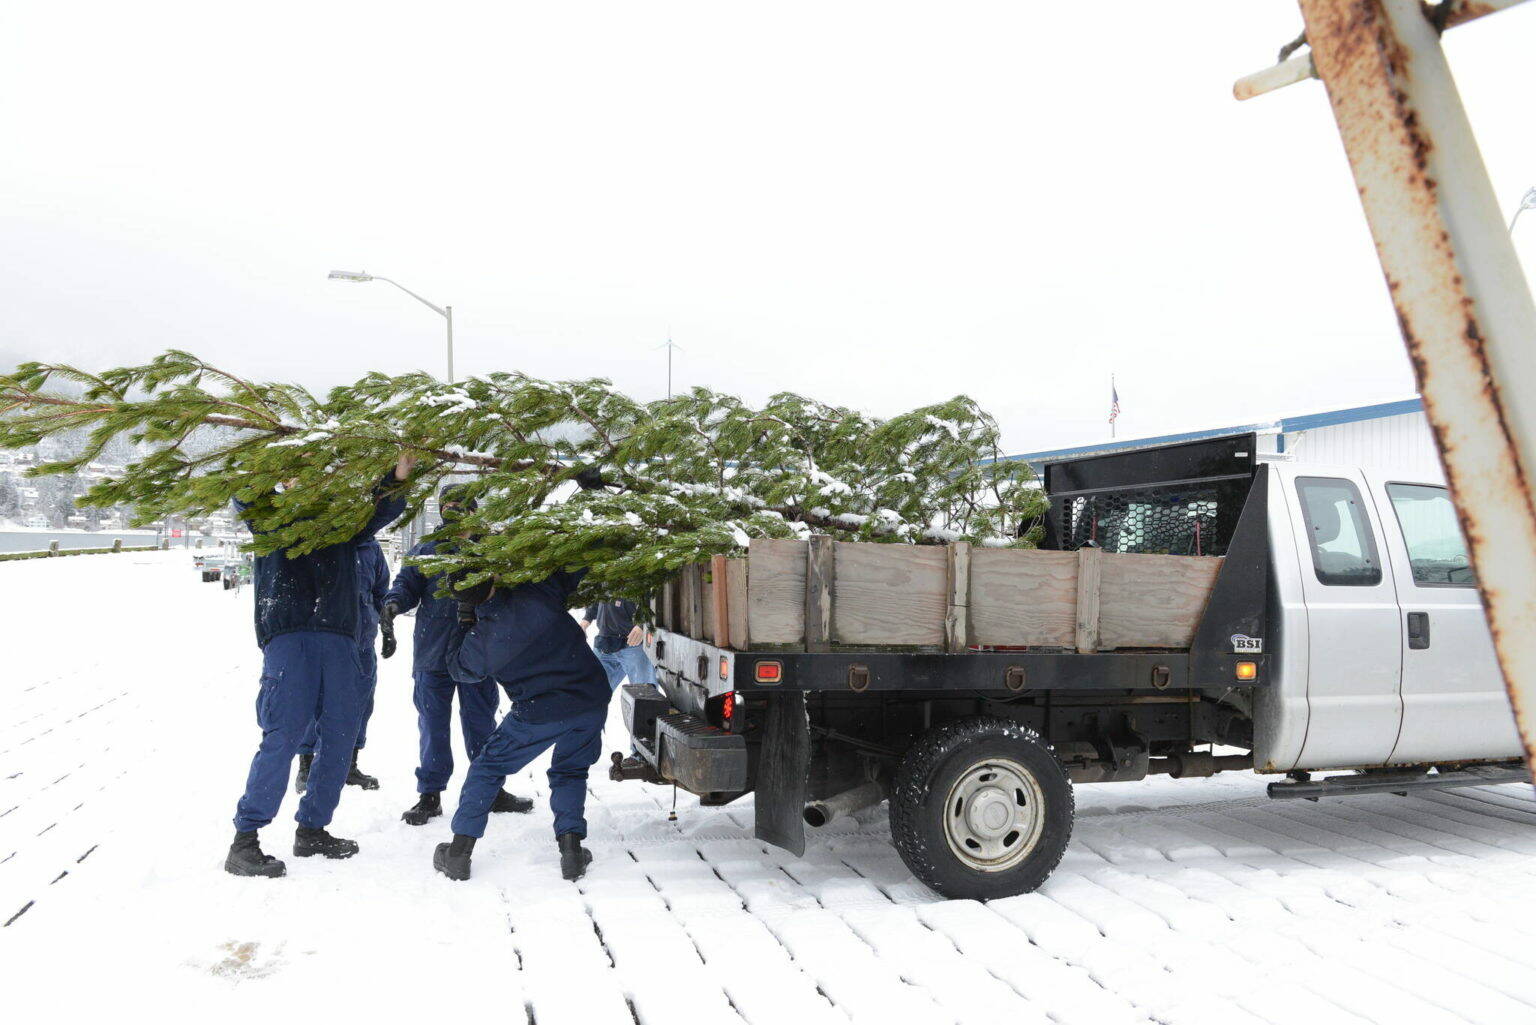 Coast Guardsmen and state employees load the Together Tree bound for the Alaska Governor’s Mansion on a truck on Nov. 29, 2021. The annual open house at the governor's mansion is back this year, after having been suspended last year due to COVID-19. (USCG photo / Petty Officer 2nd Class Lexie Preston)